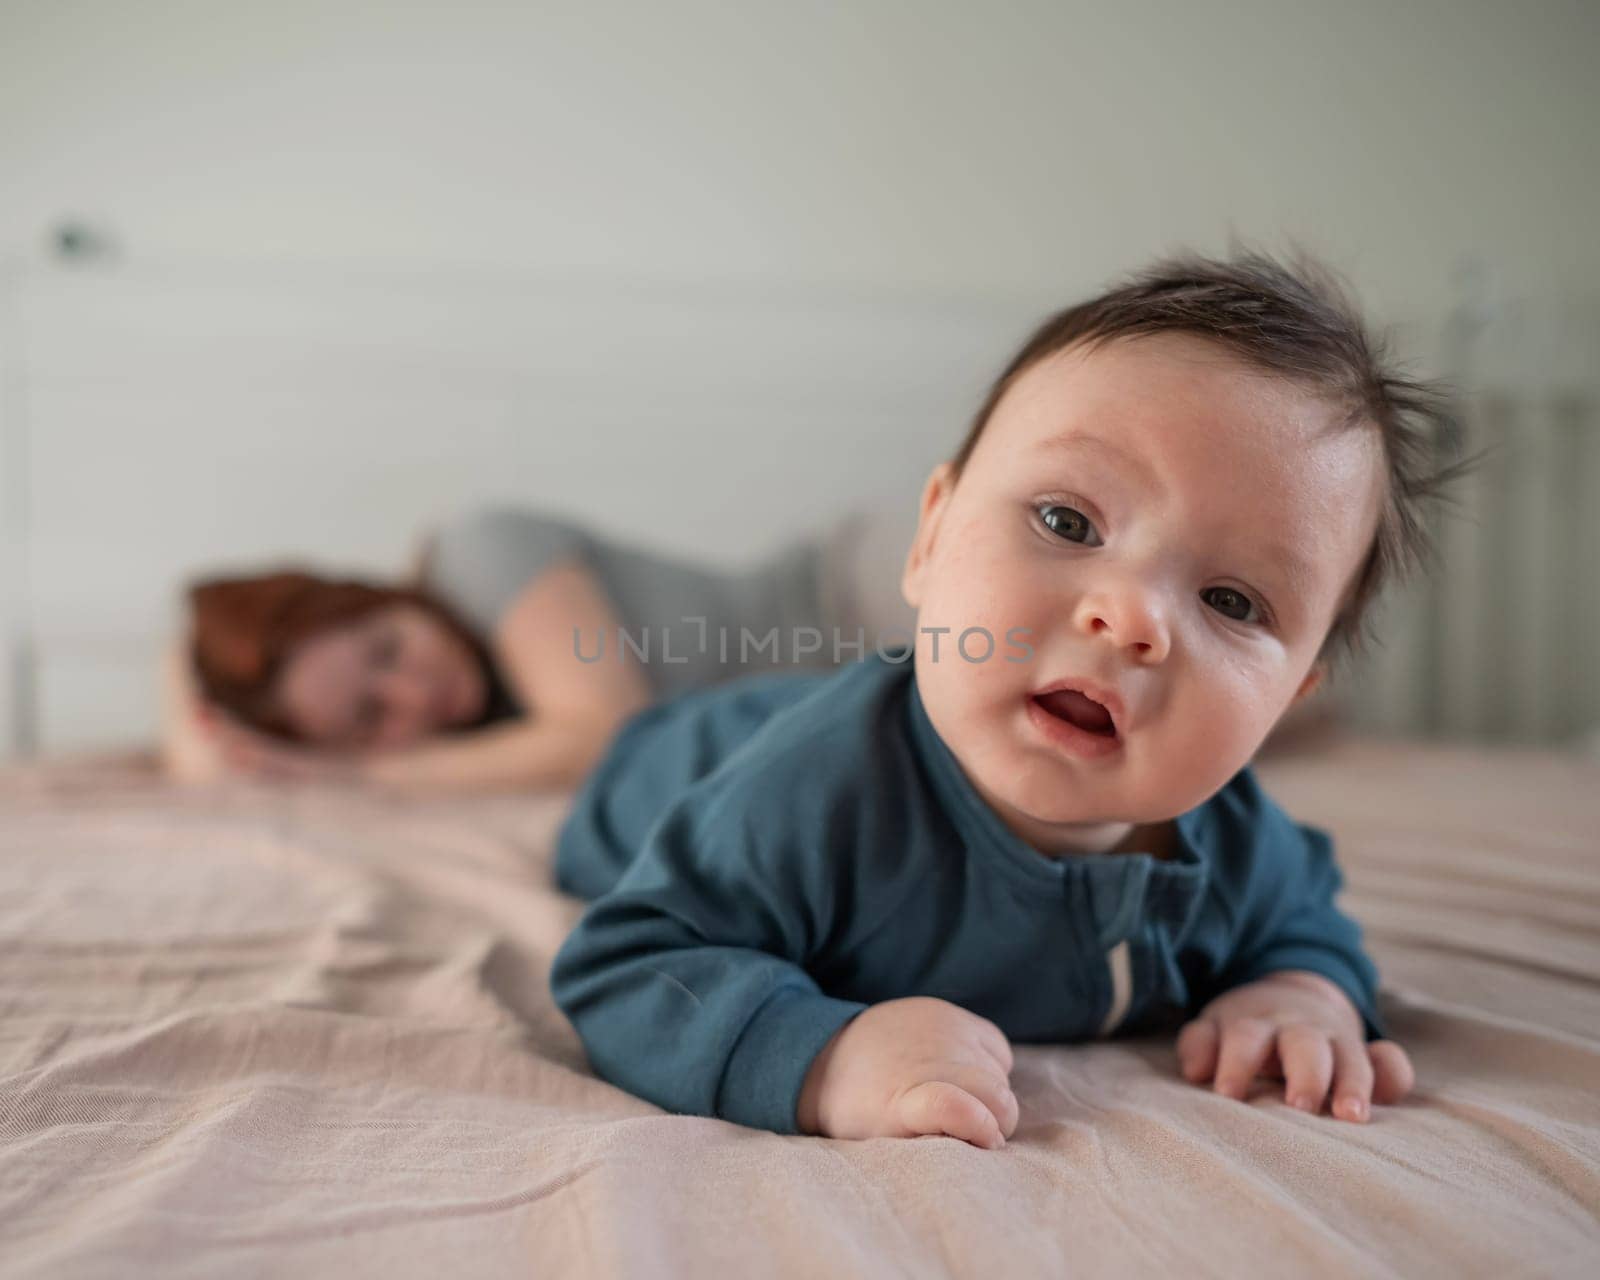 A three-month-old boy lies on his stomach on the bed and his mother sleeps behind him. Postpartum depression. by mrwed54